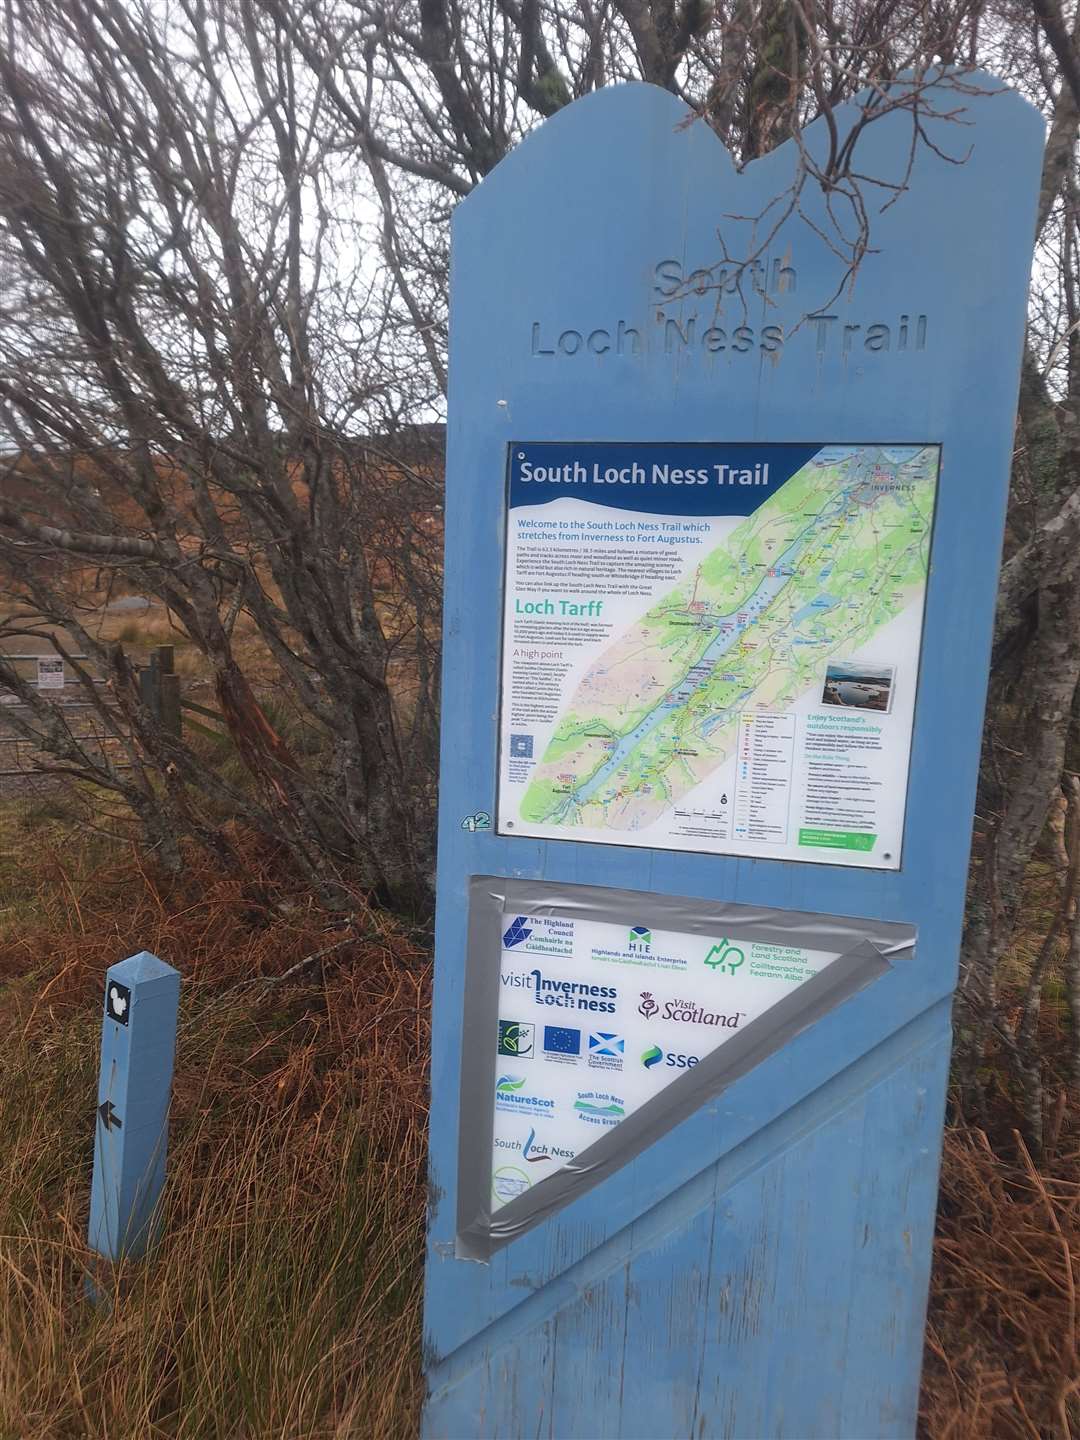 Loch Tarff used to mark the southern end of the South Loch Ness Trail.